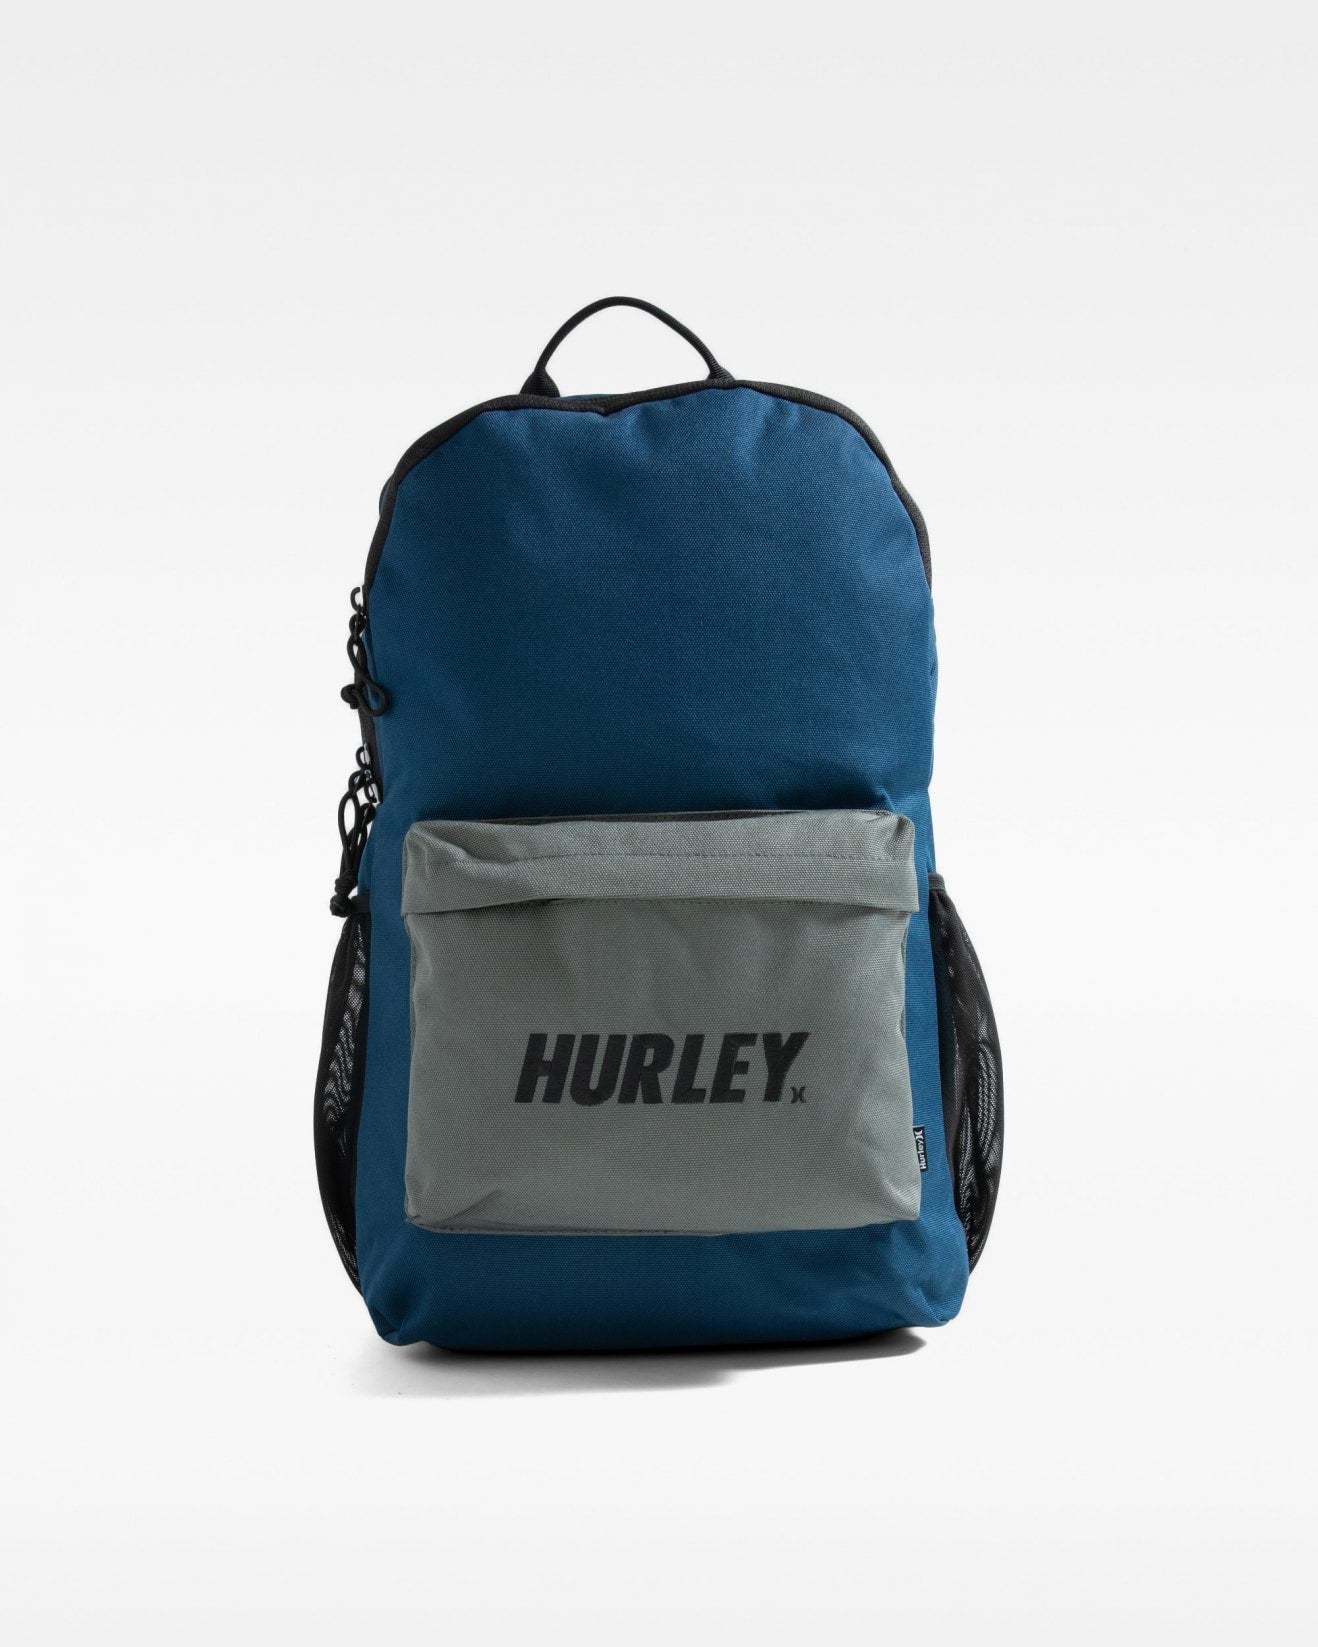 Hurley Day Out Backpack- Poseidon Blue